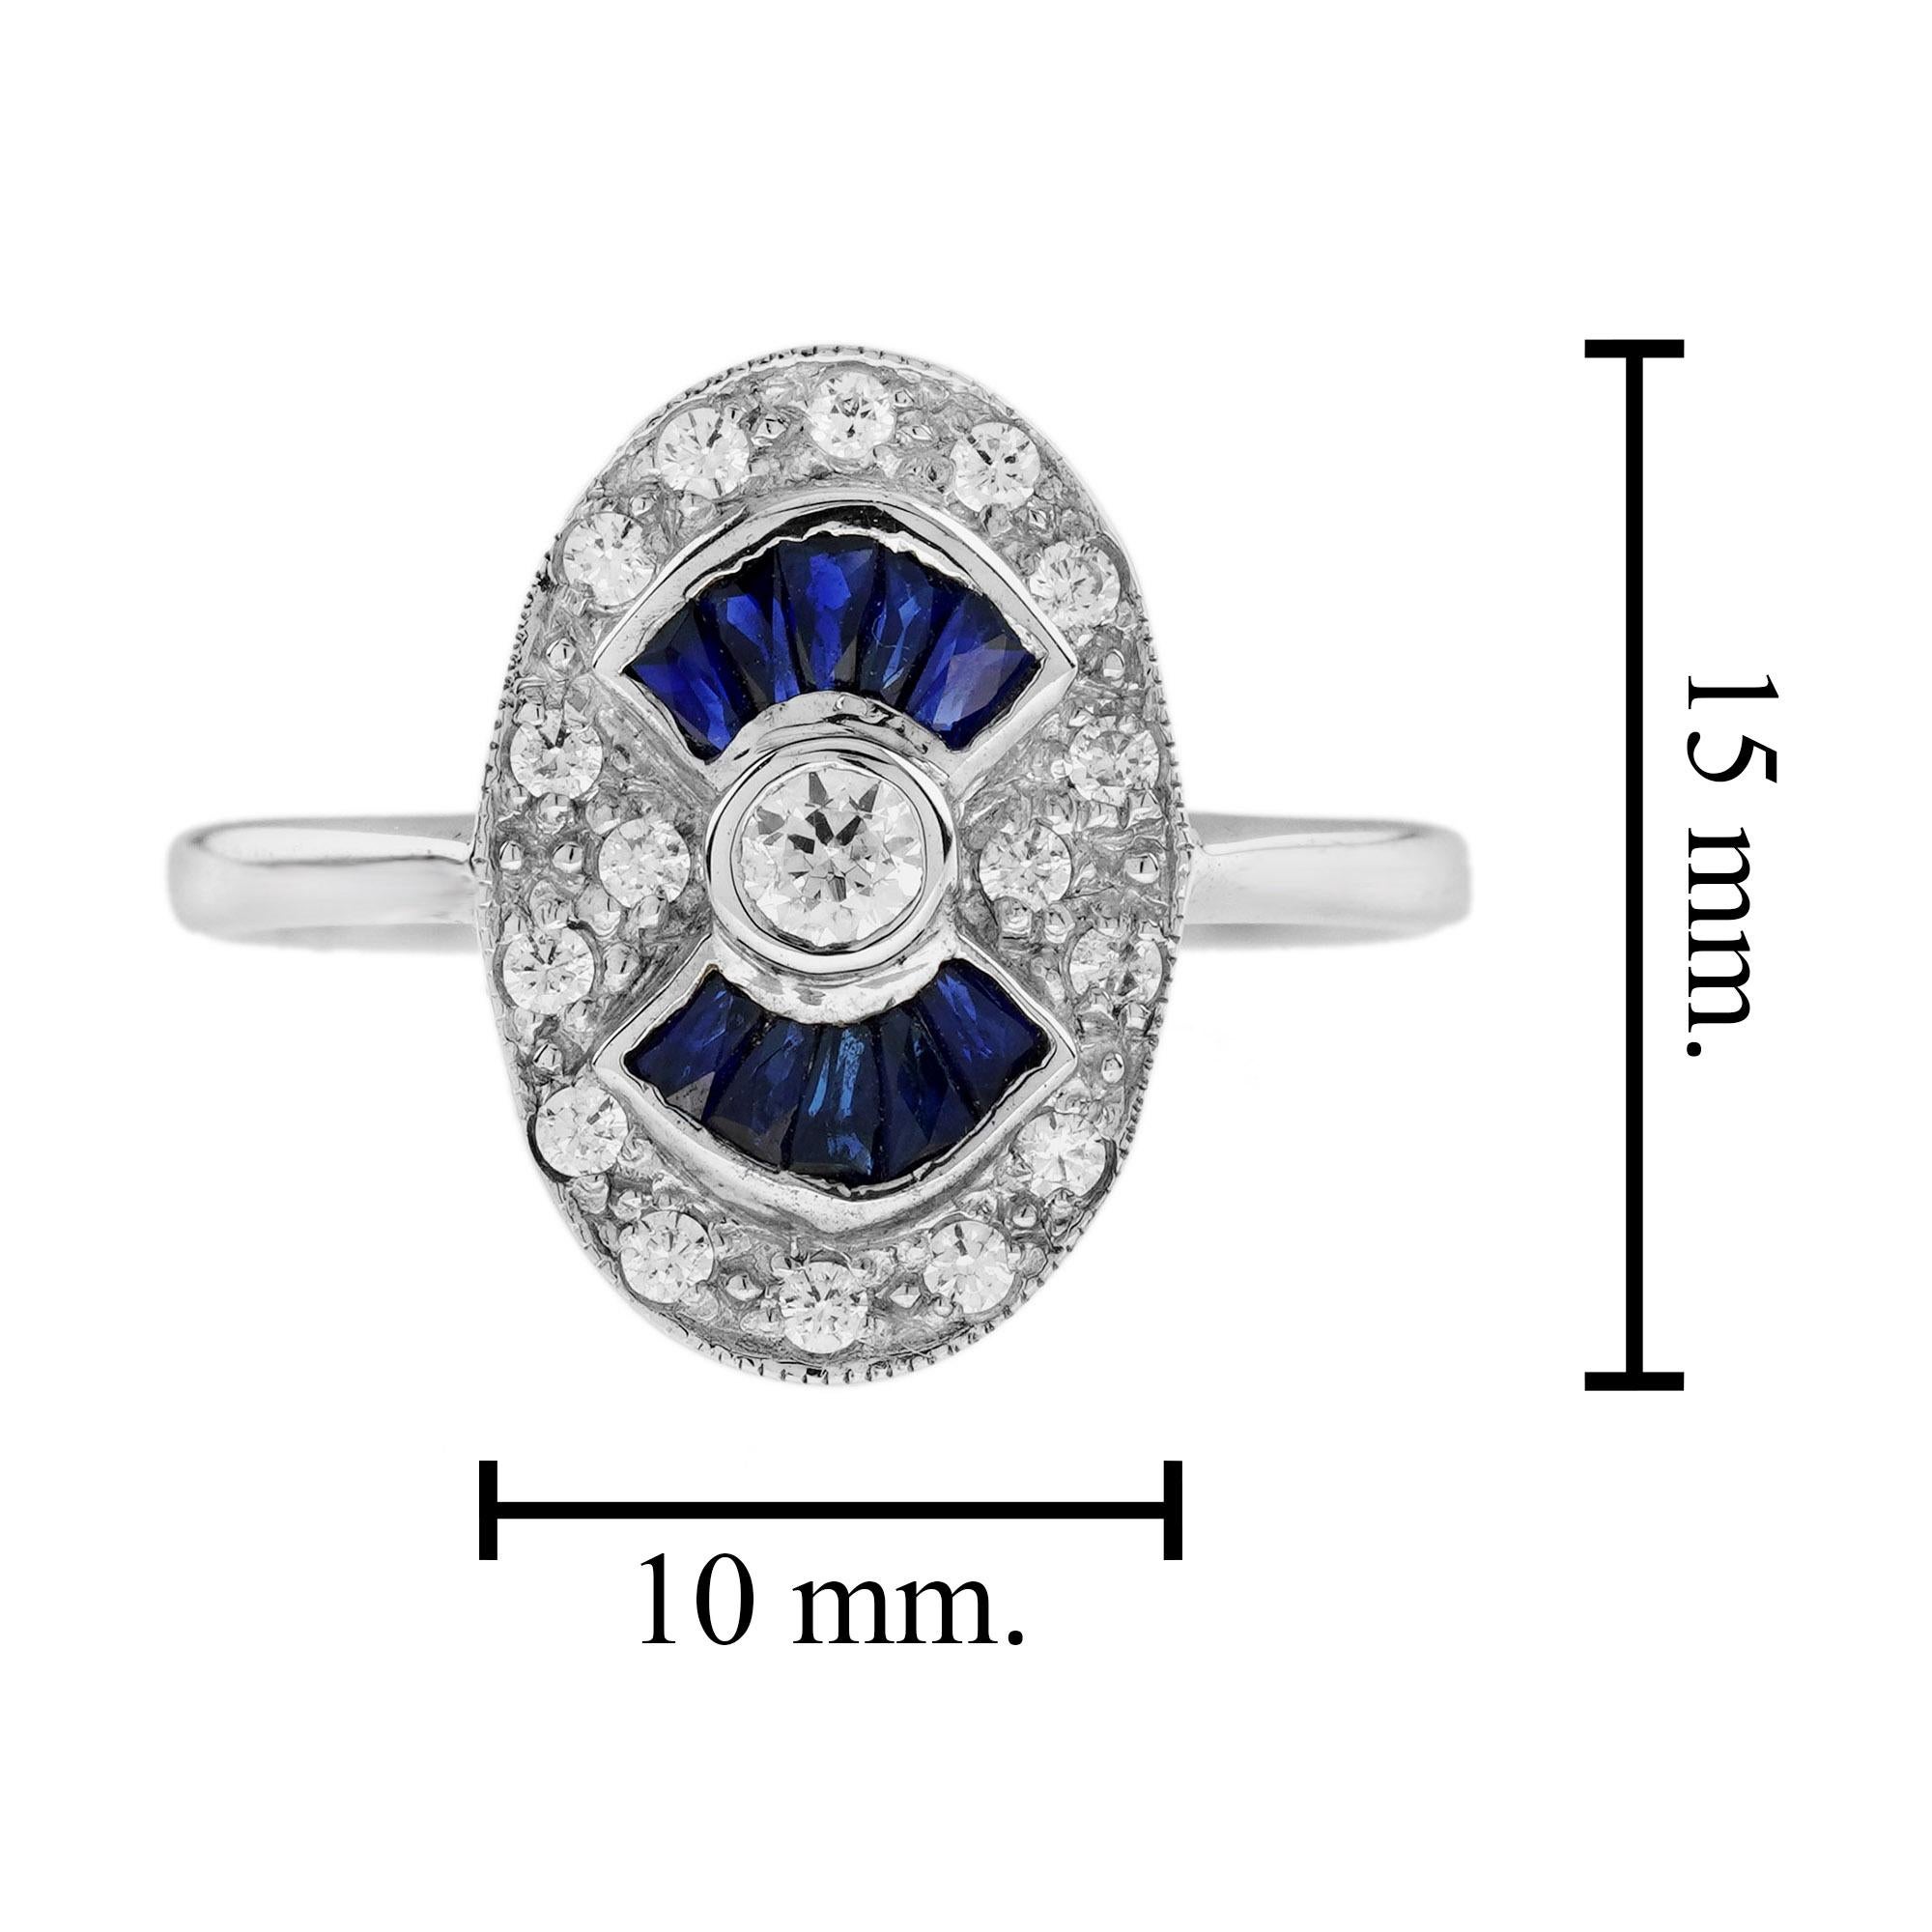 For Sale:  Diamond and Blue Sapphire Art Deco Style Oval Shaped Ring in 14K White Gold 7